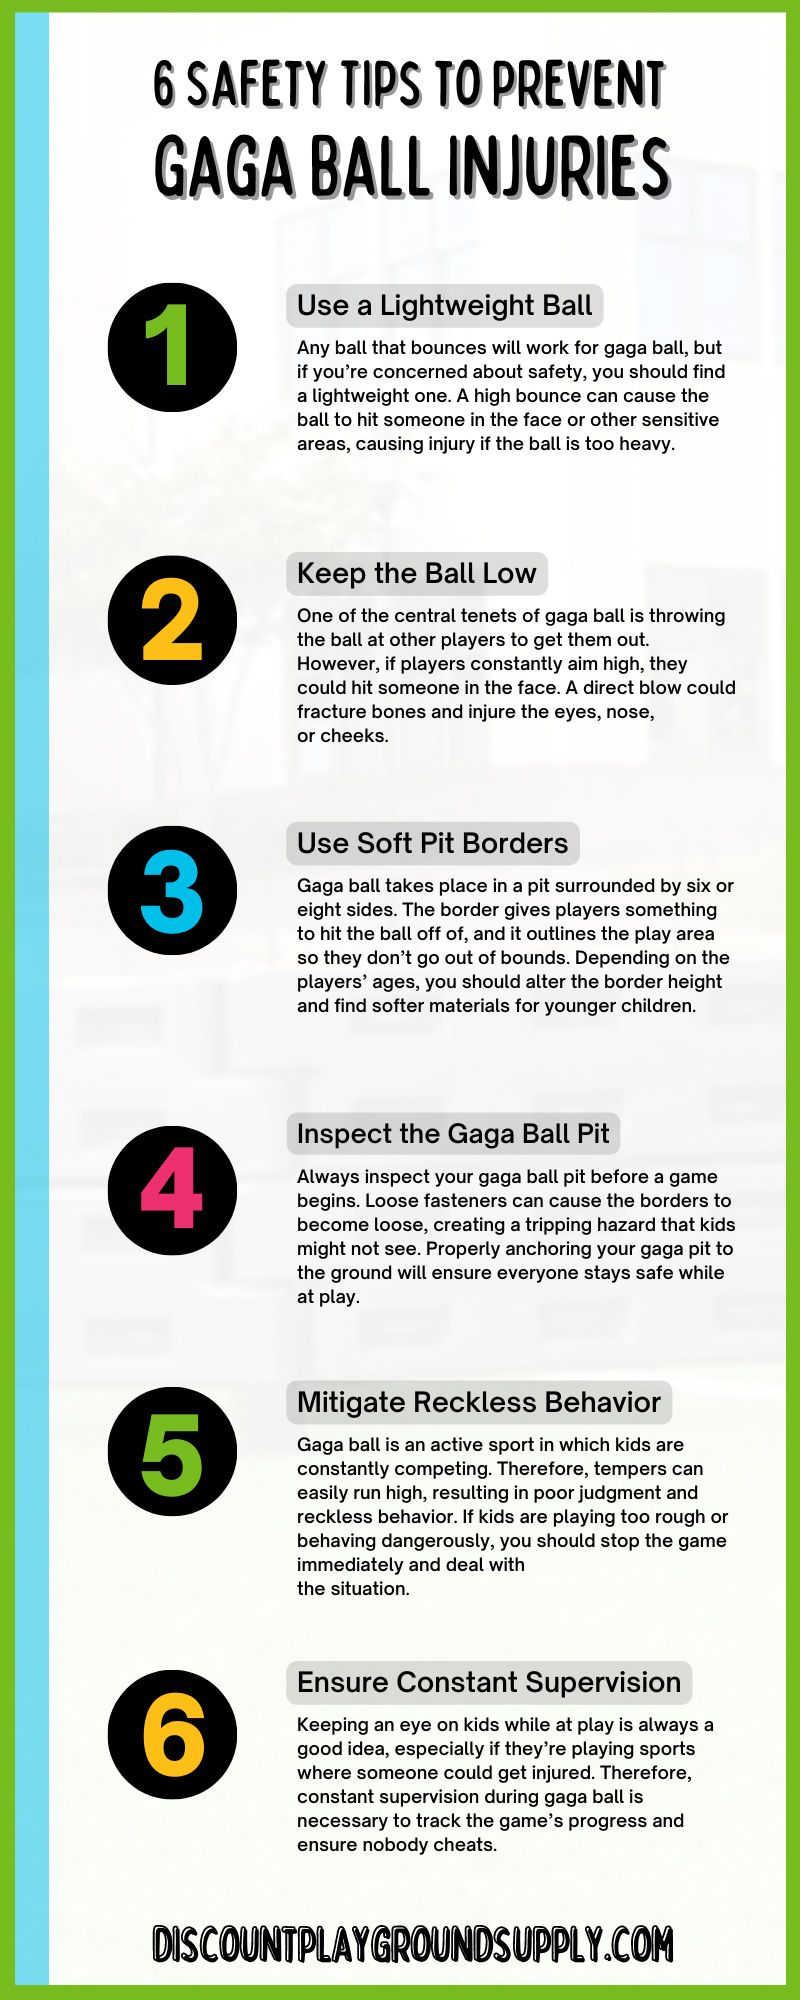 6 Safety Tips To Prevent Gaga Ball Injuries